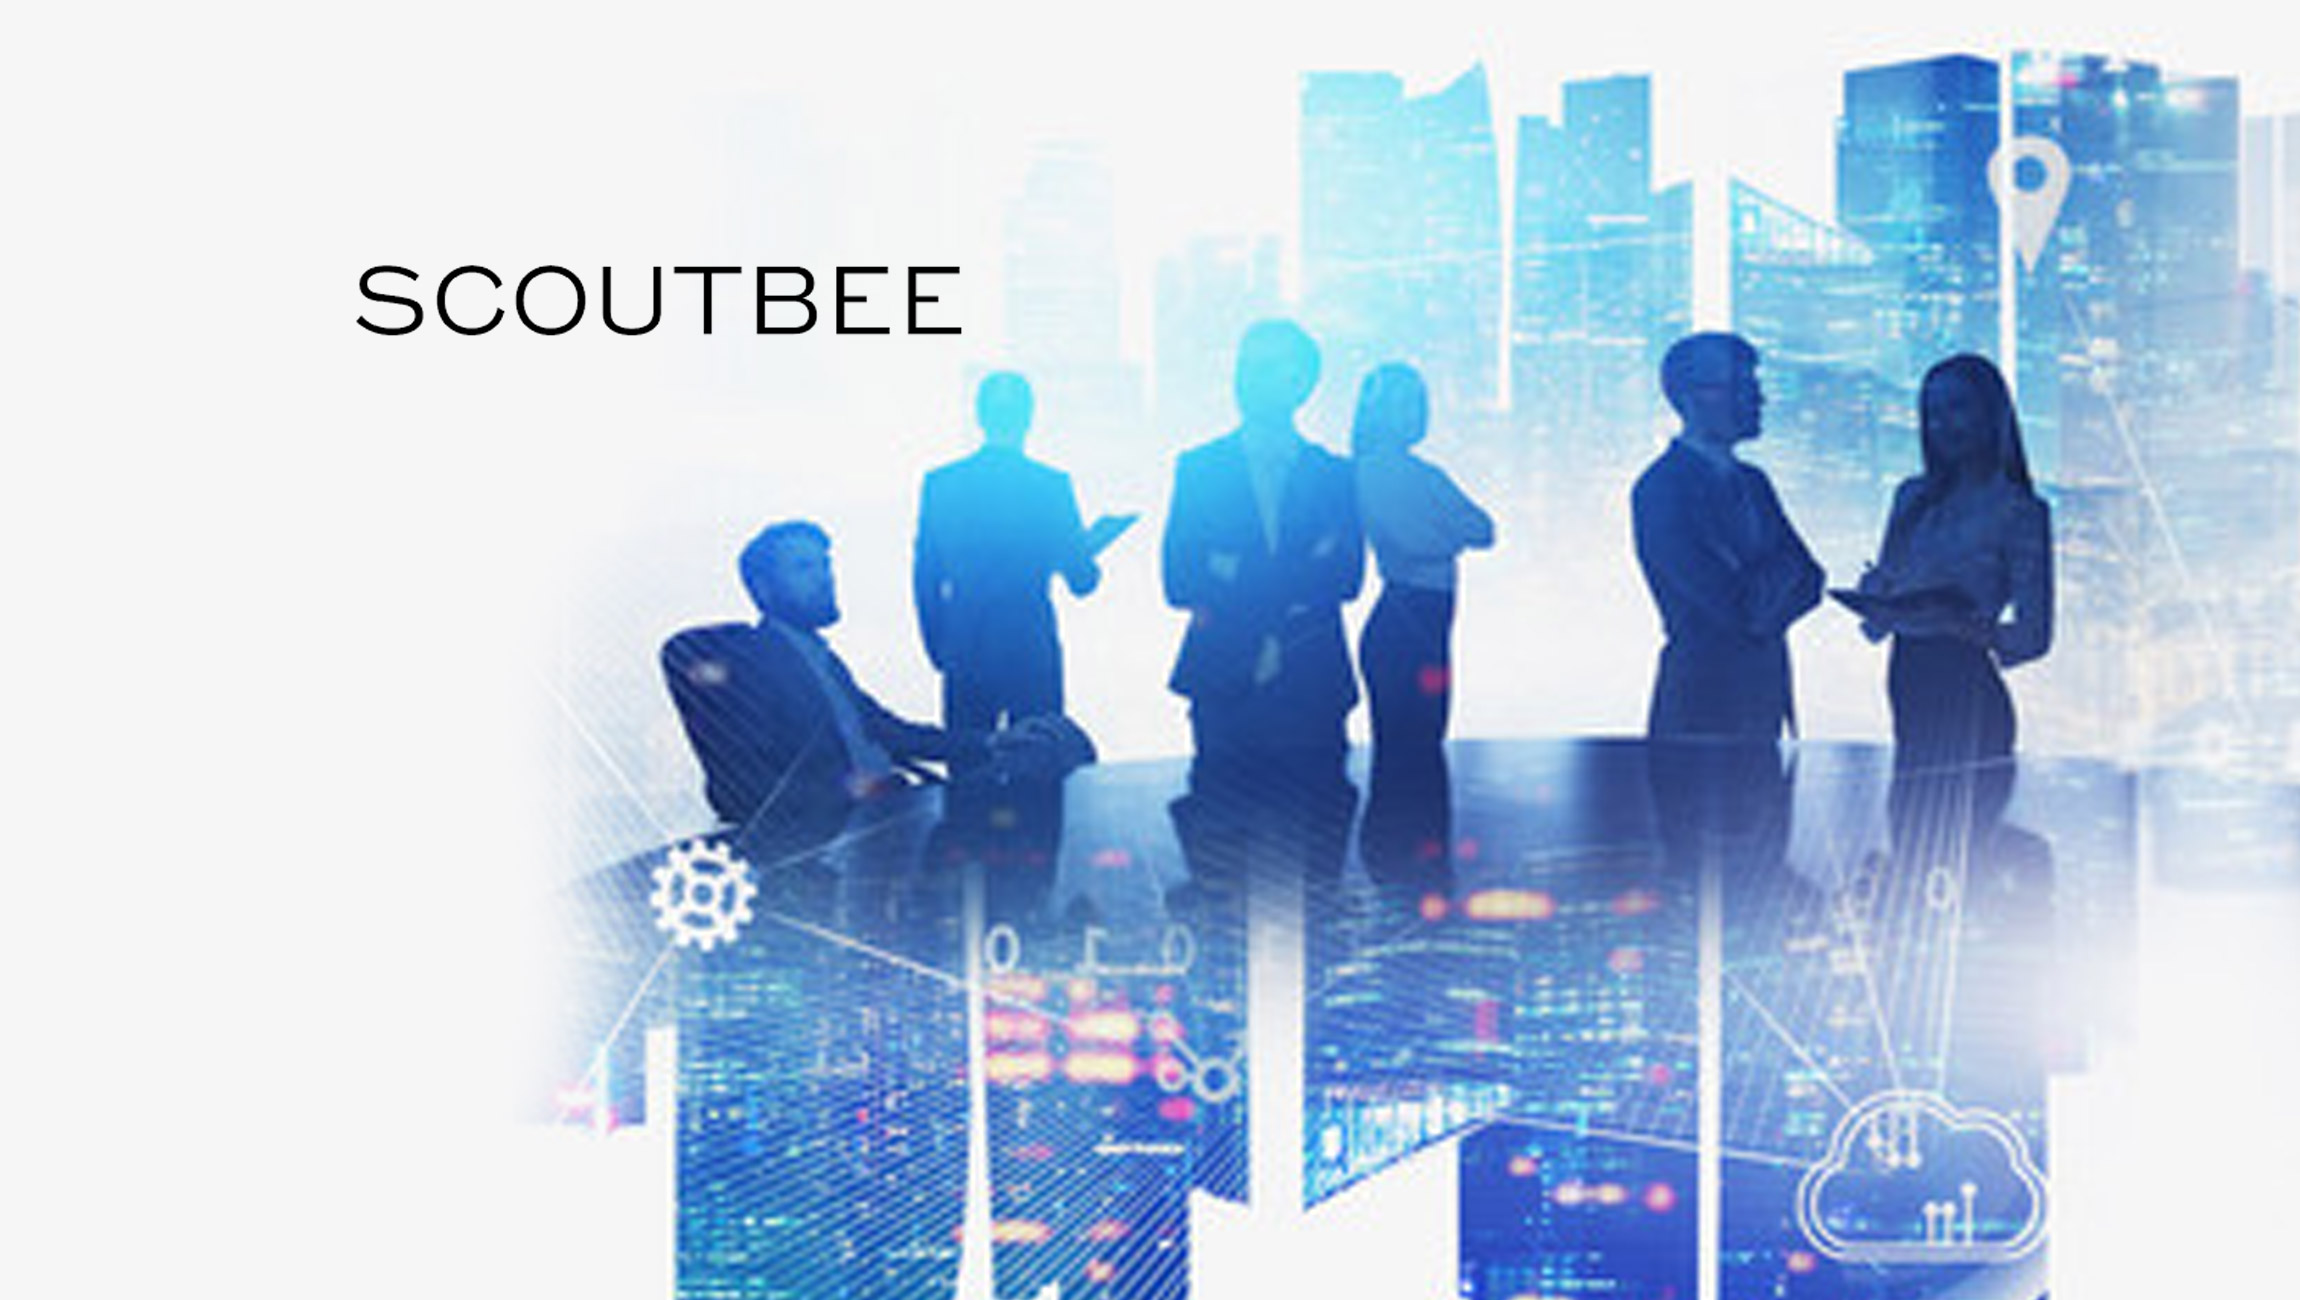 Scoutbee Announces the Creation of its Strategic Advisory Board and Inaugural Members